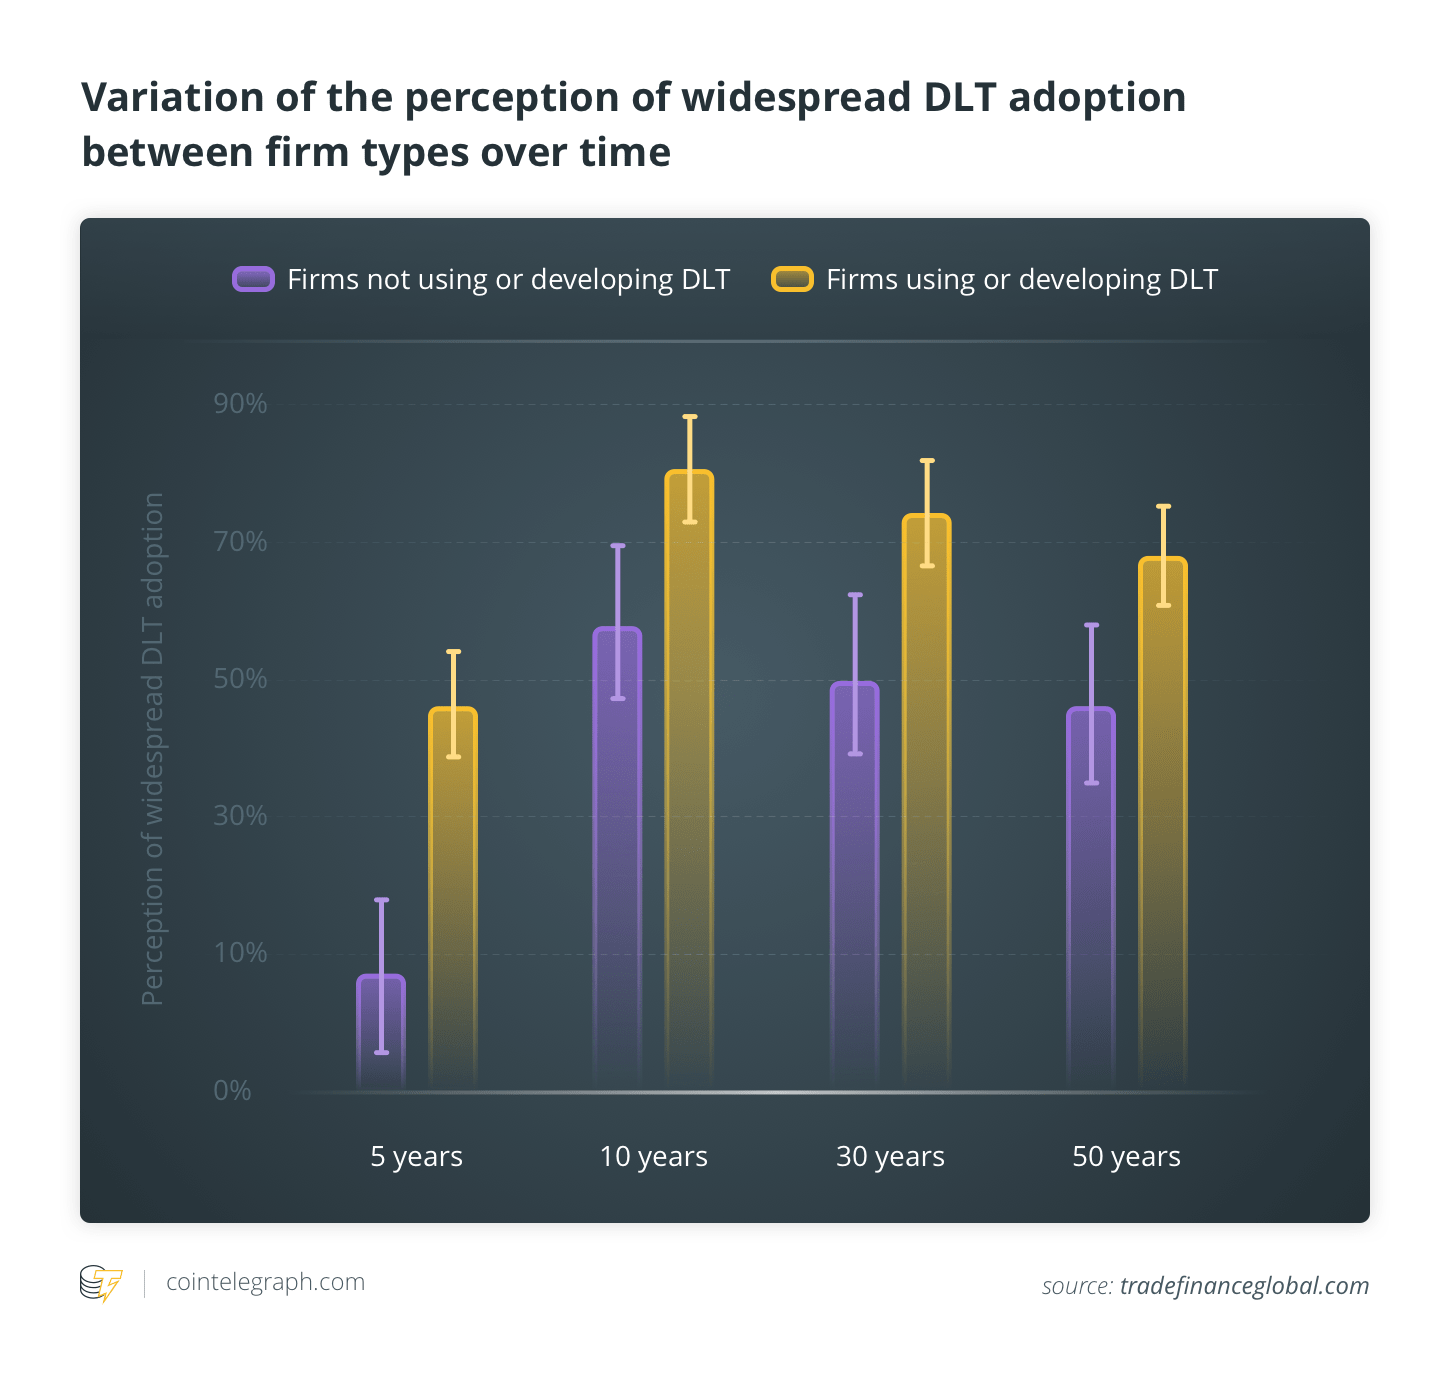 Variation of the perception of widespread DLT adoption between firm types over time